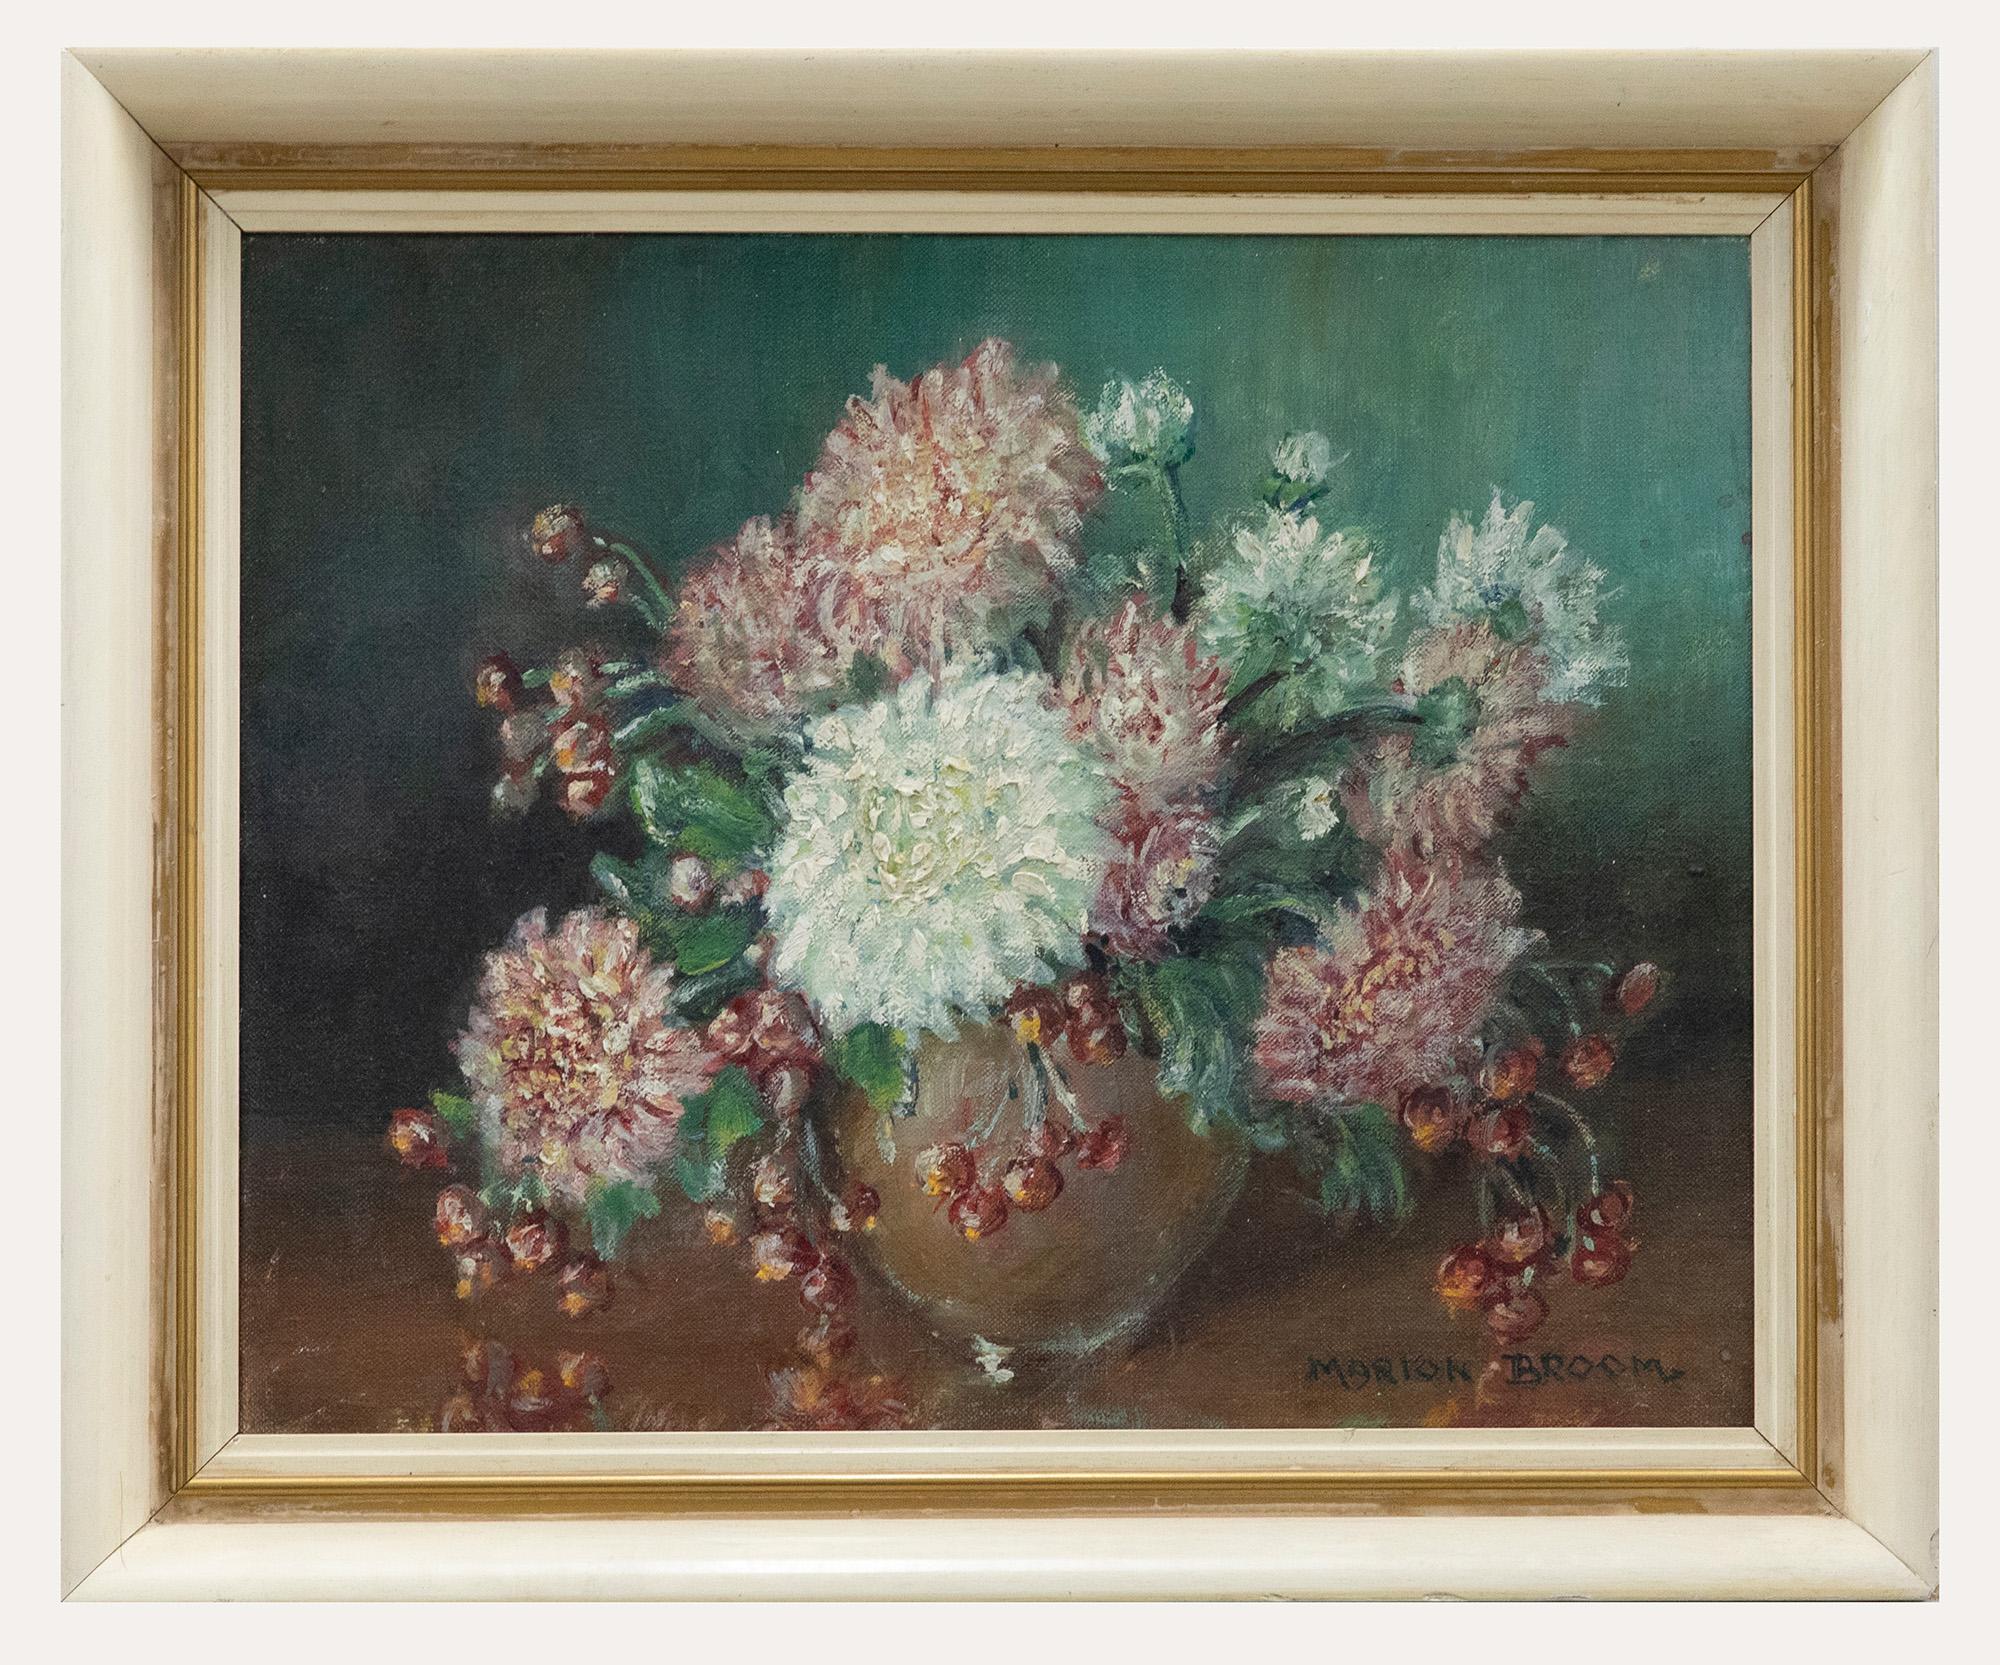 A charming oil study depicting pink and white dahlias with blossoms placed in a vase. Signed to the lower right. Presented in a varnished wooden frame. On canvas.
